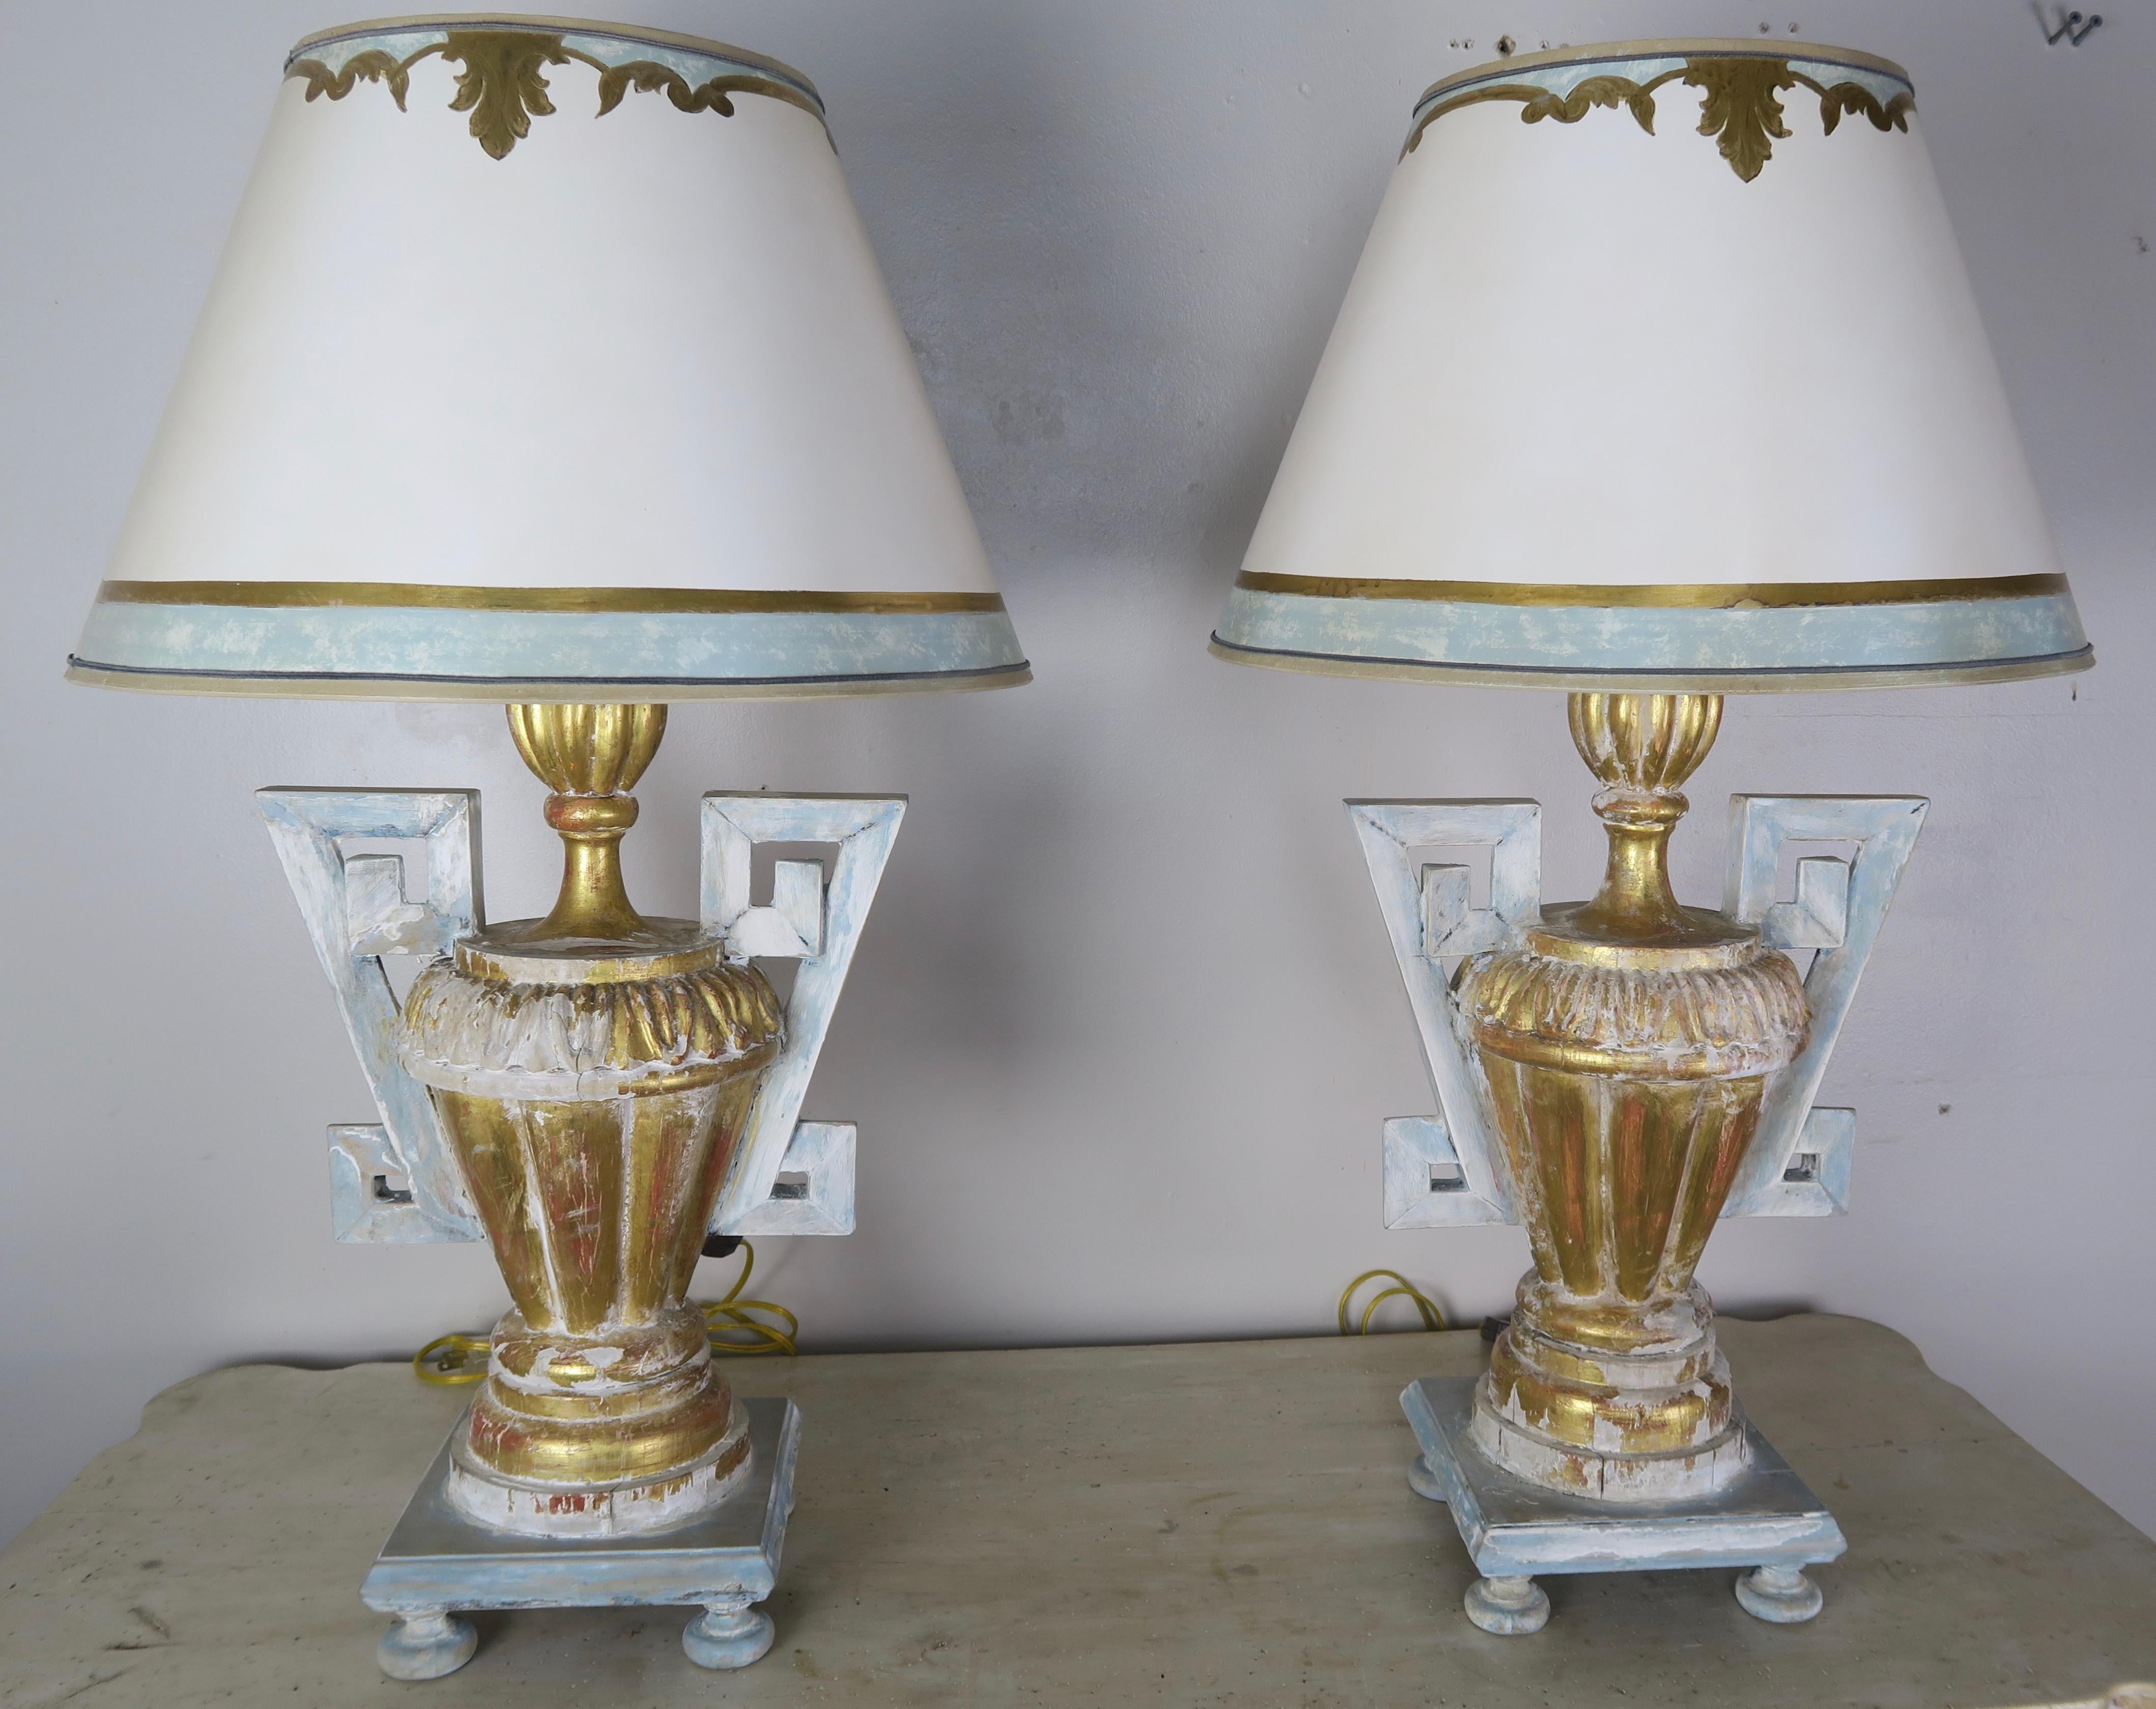 20th Century Pair of Greek Key Painted Lamps with Parchment Shades For Sale